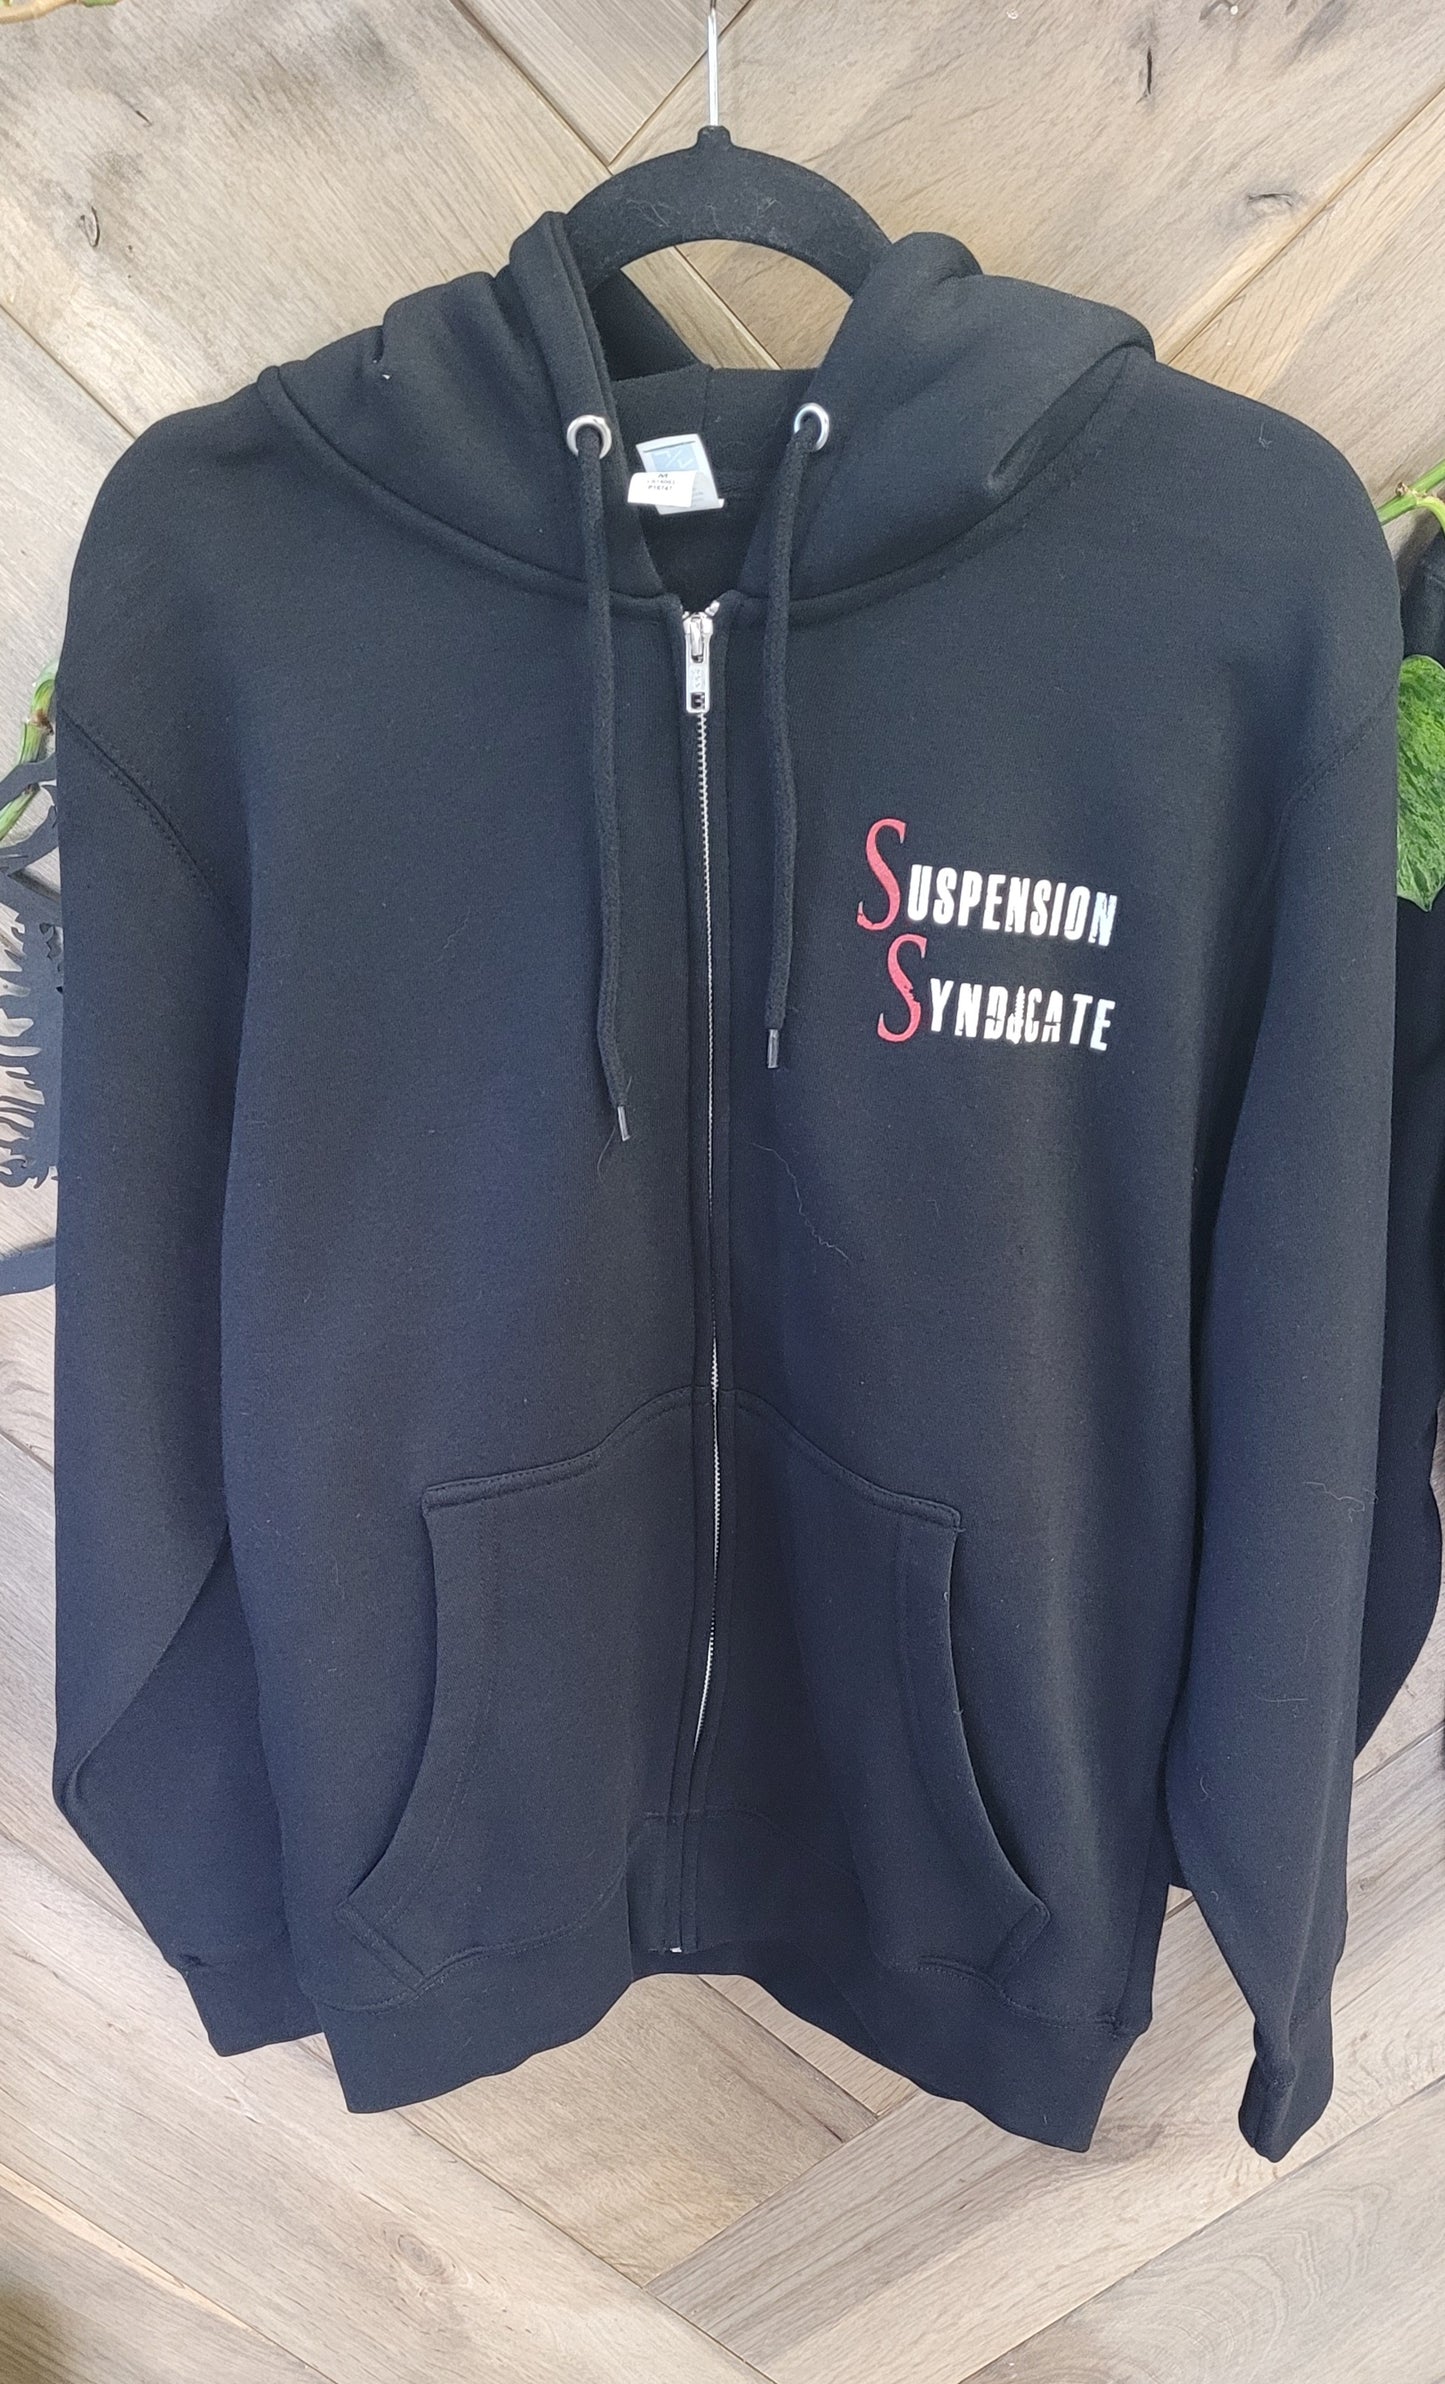 Syndicate Zip Up Hoodies "Loose And Roundy Since 2017"